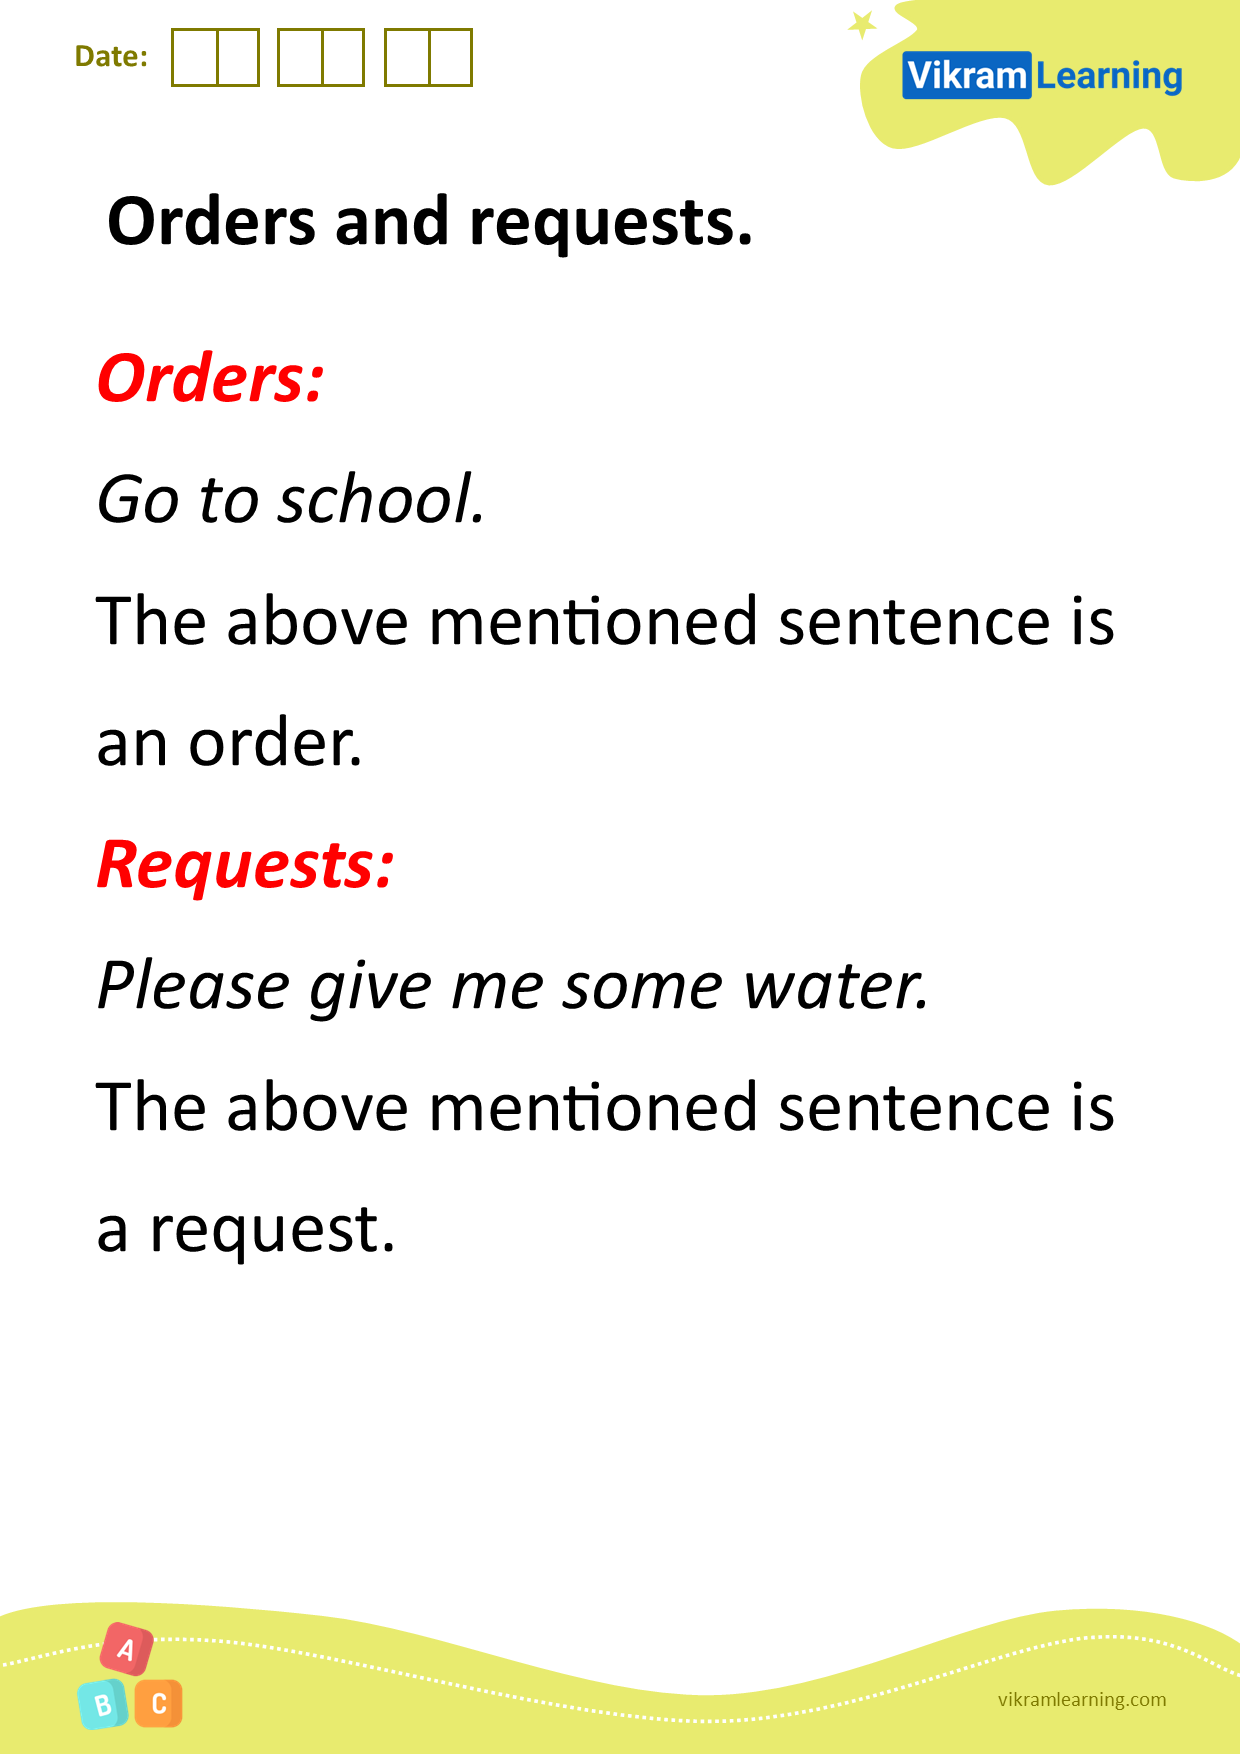 Download orders and requests worksheets